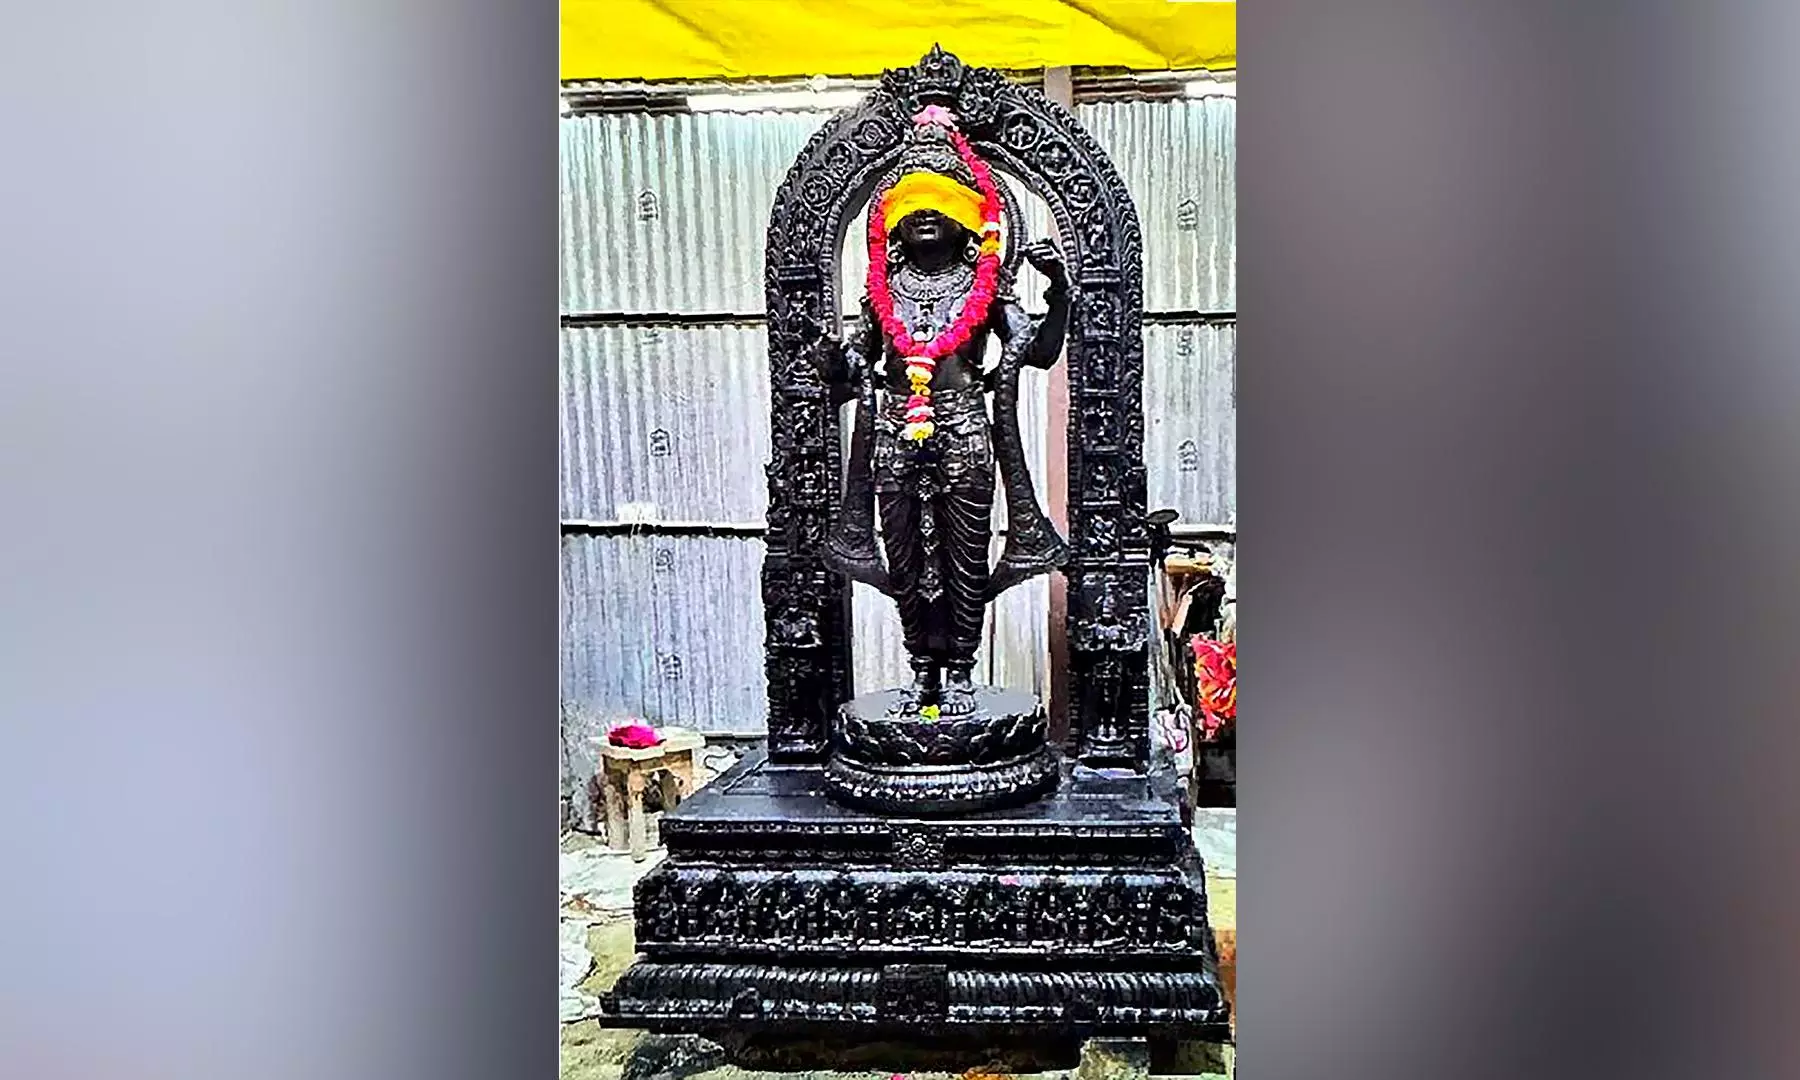 First look of Ram Lallas idol inside Ayodhya temple revealed